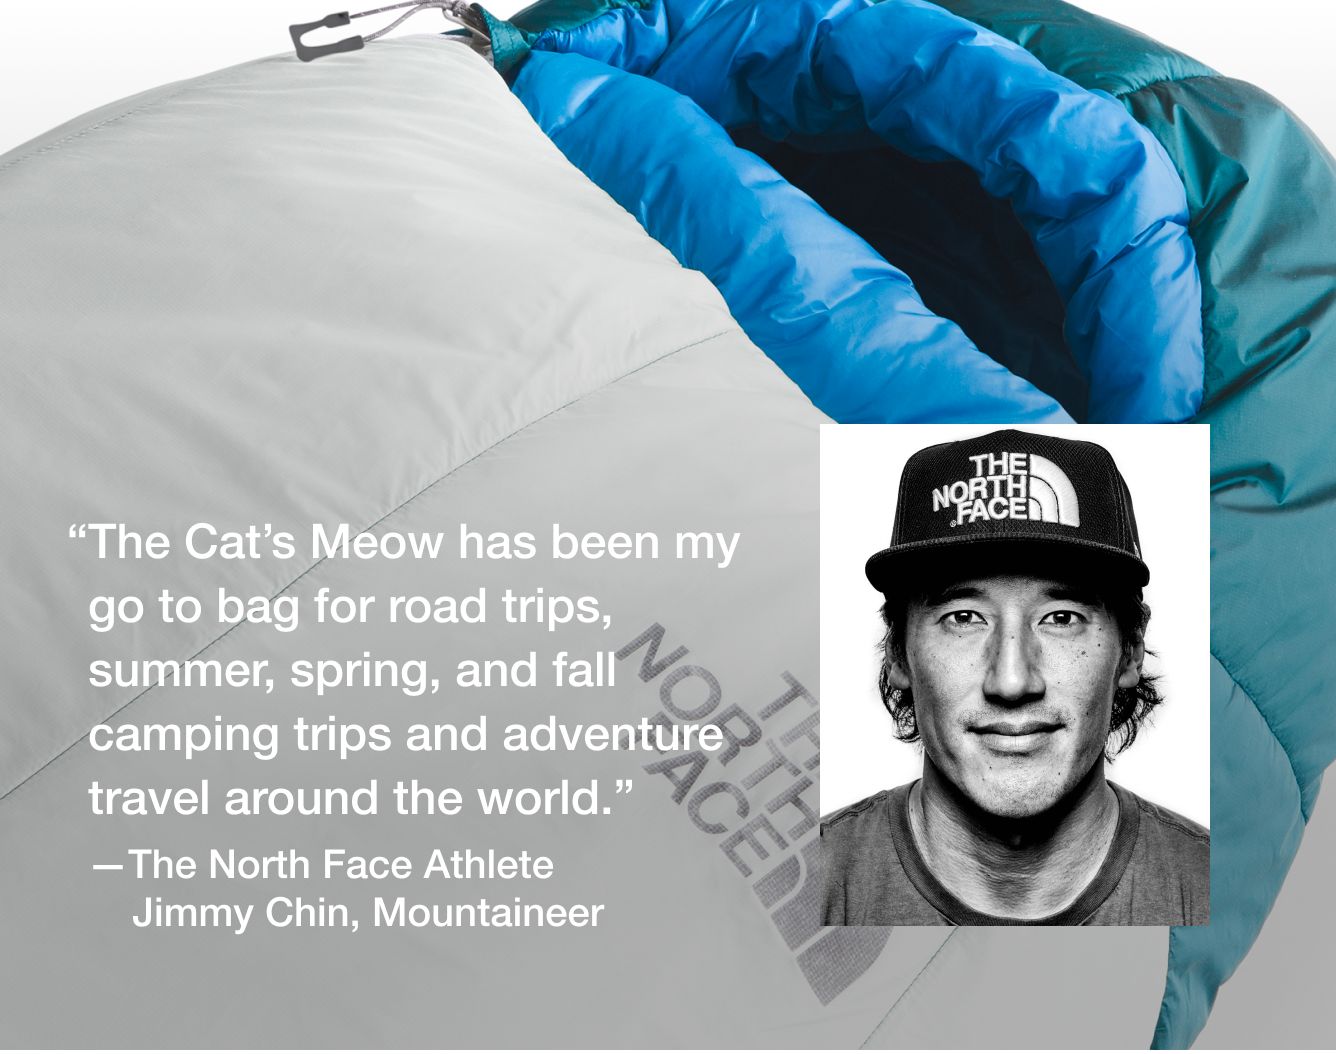 “The Cat’s Meow has been my go-to bag for road trips, summer, spring, and fall camping trips and adventure travel around the world.”   —The North Face Athlete Jimmy Chin, Mountaineer 